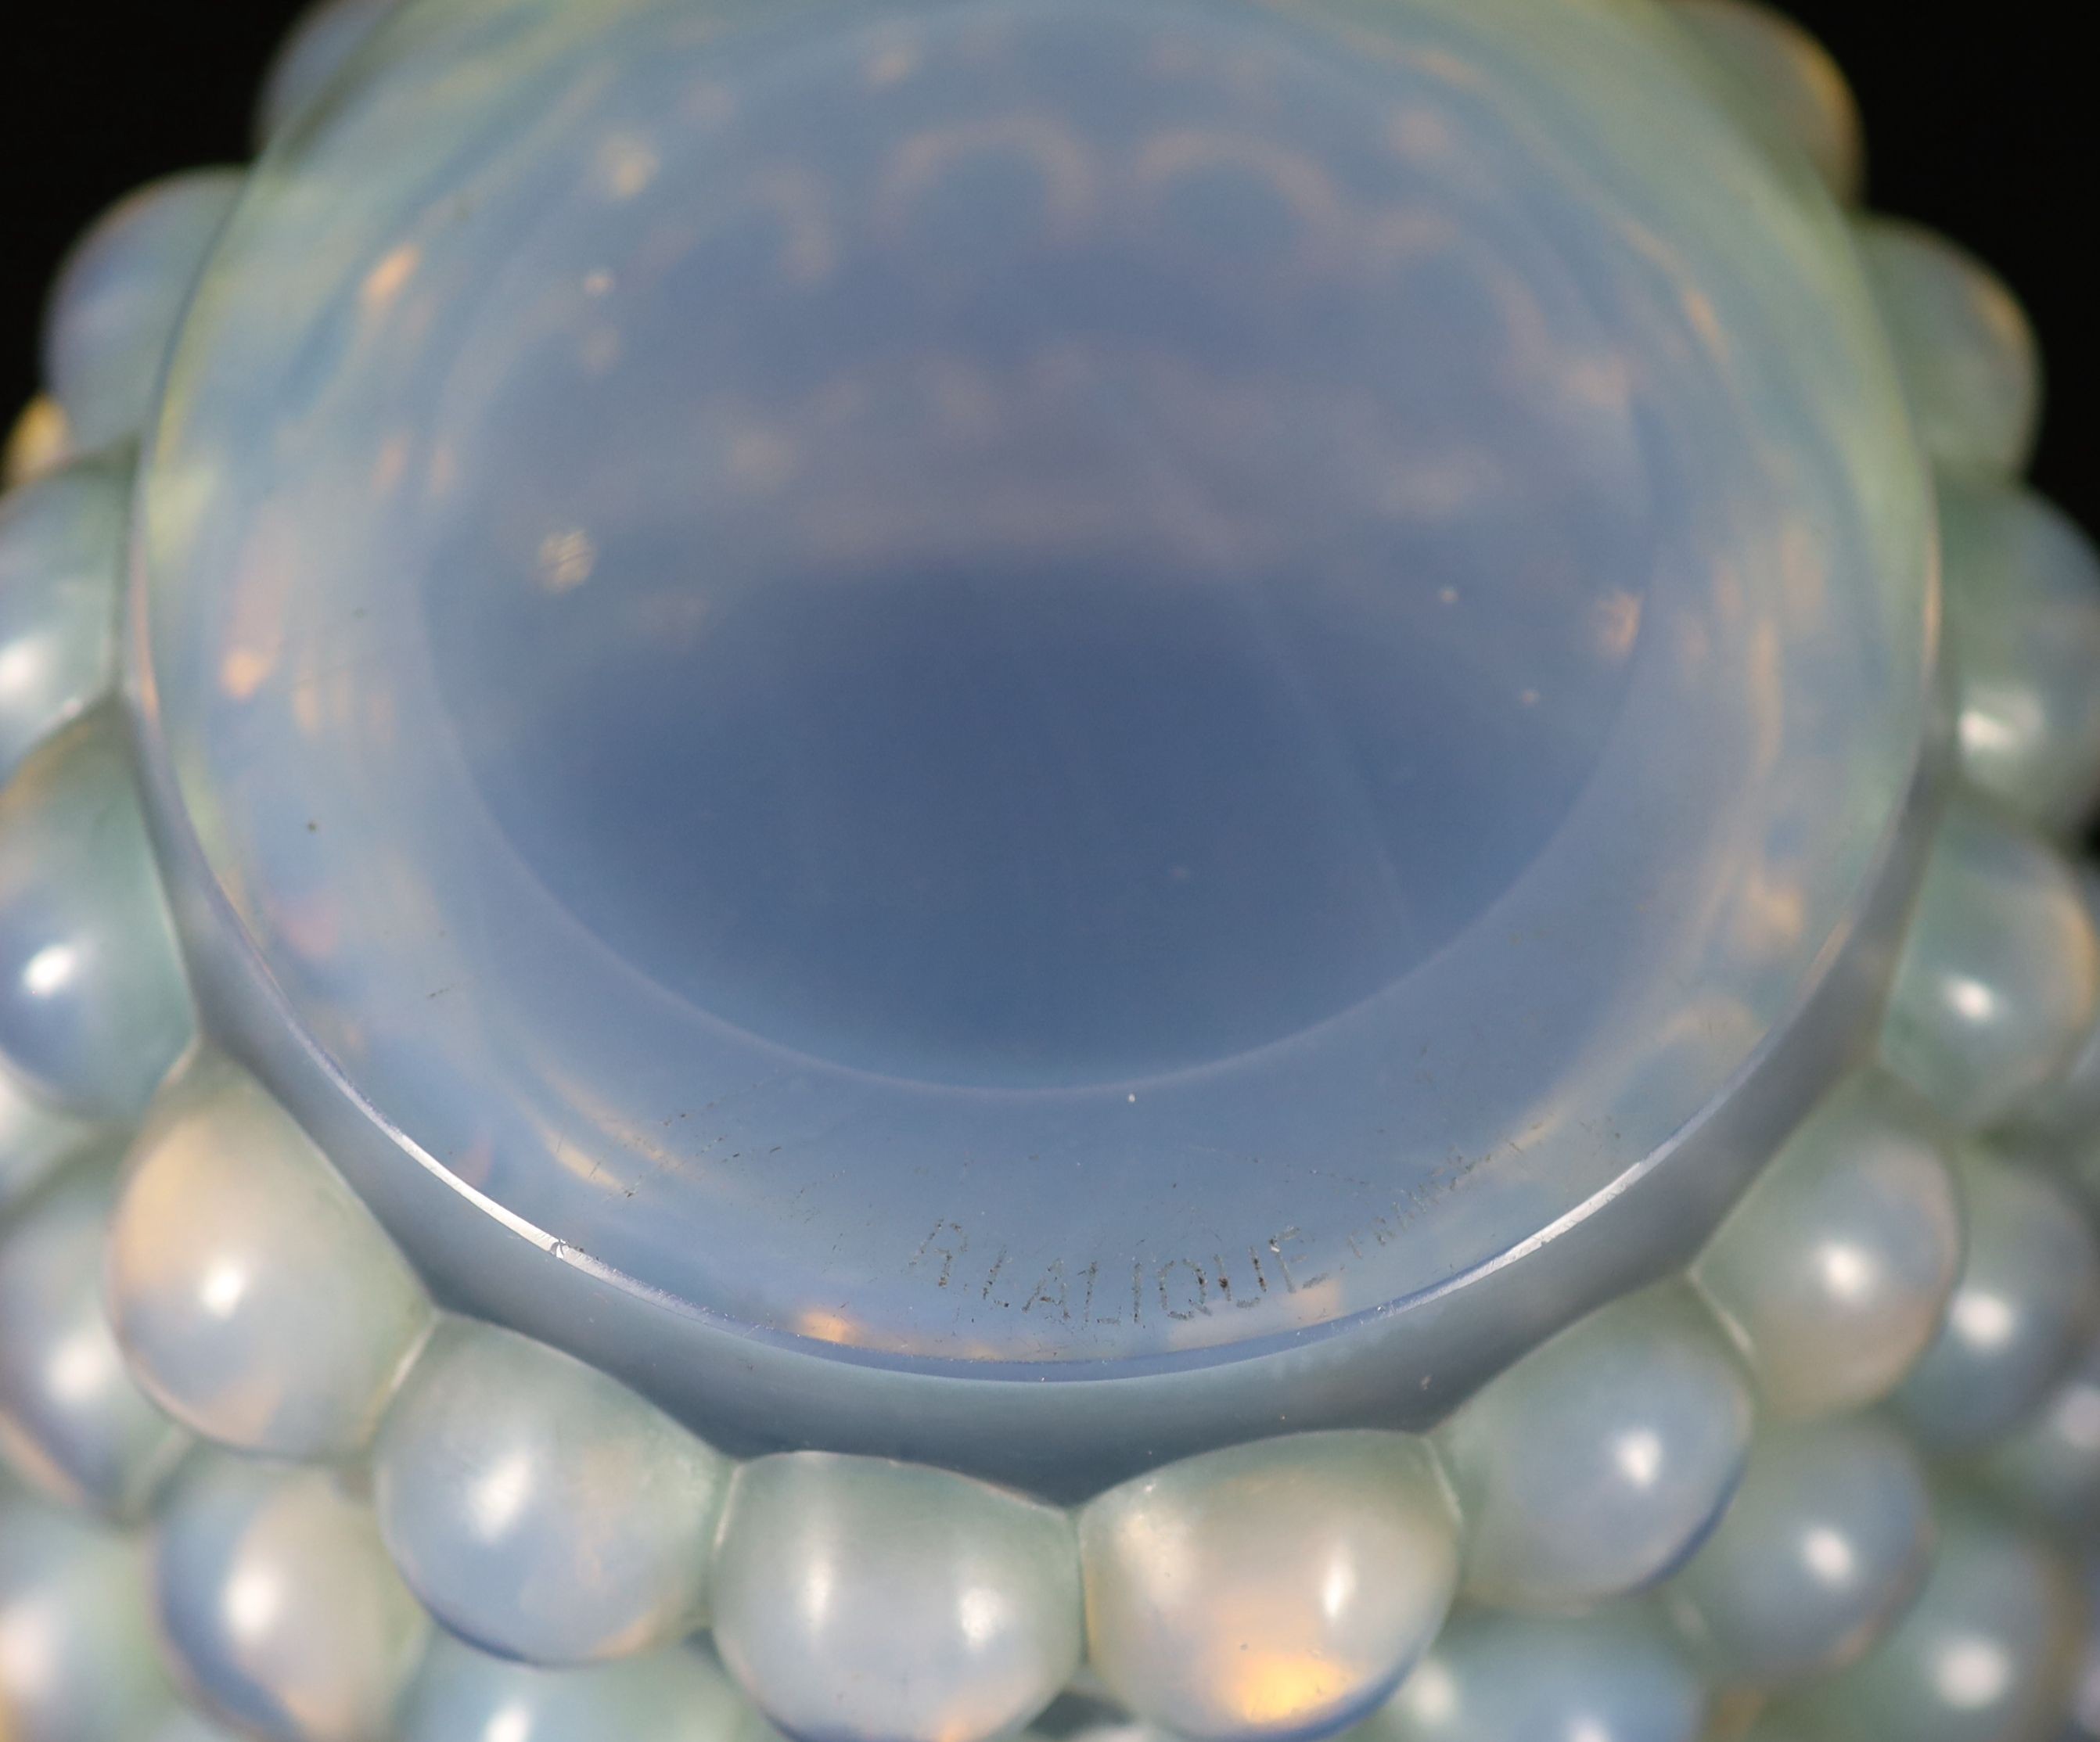 A Lalique Montmorency opalescent glass vase, Marcilhac 1050, model introduced 1930, 20.3 cm high